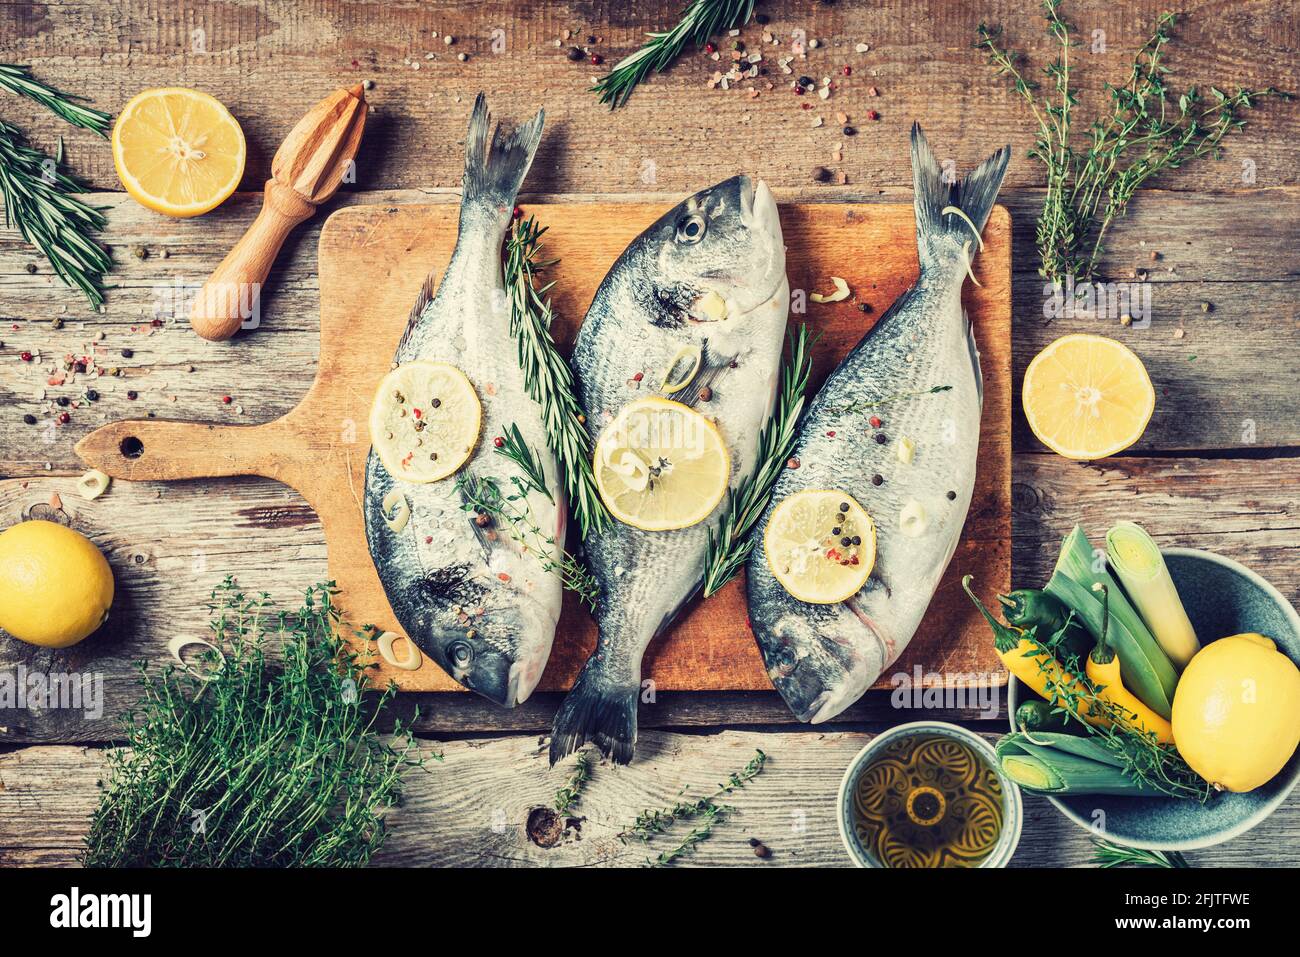 Raw dorado fish with ingredients, lemon, herbs, oil, vegetables and spices on wooden cutting board over wood background. Top view. Healthy food diet Stock Photo